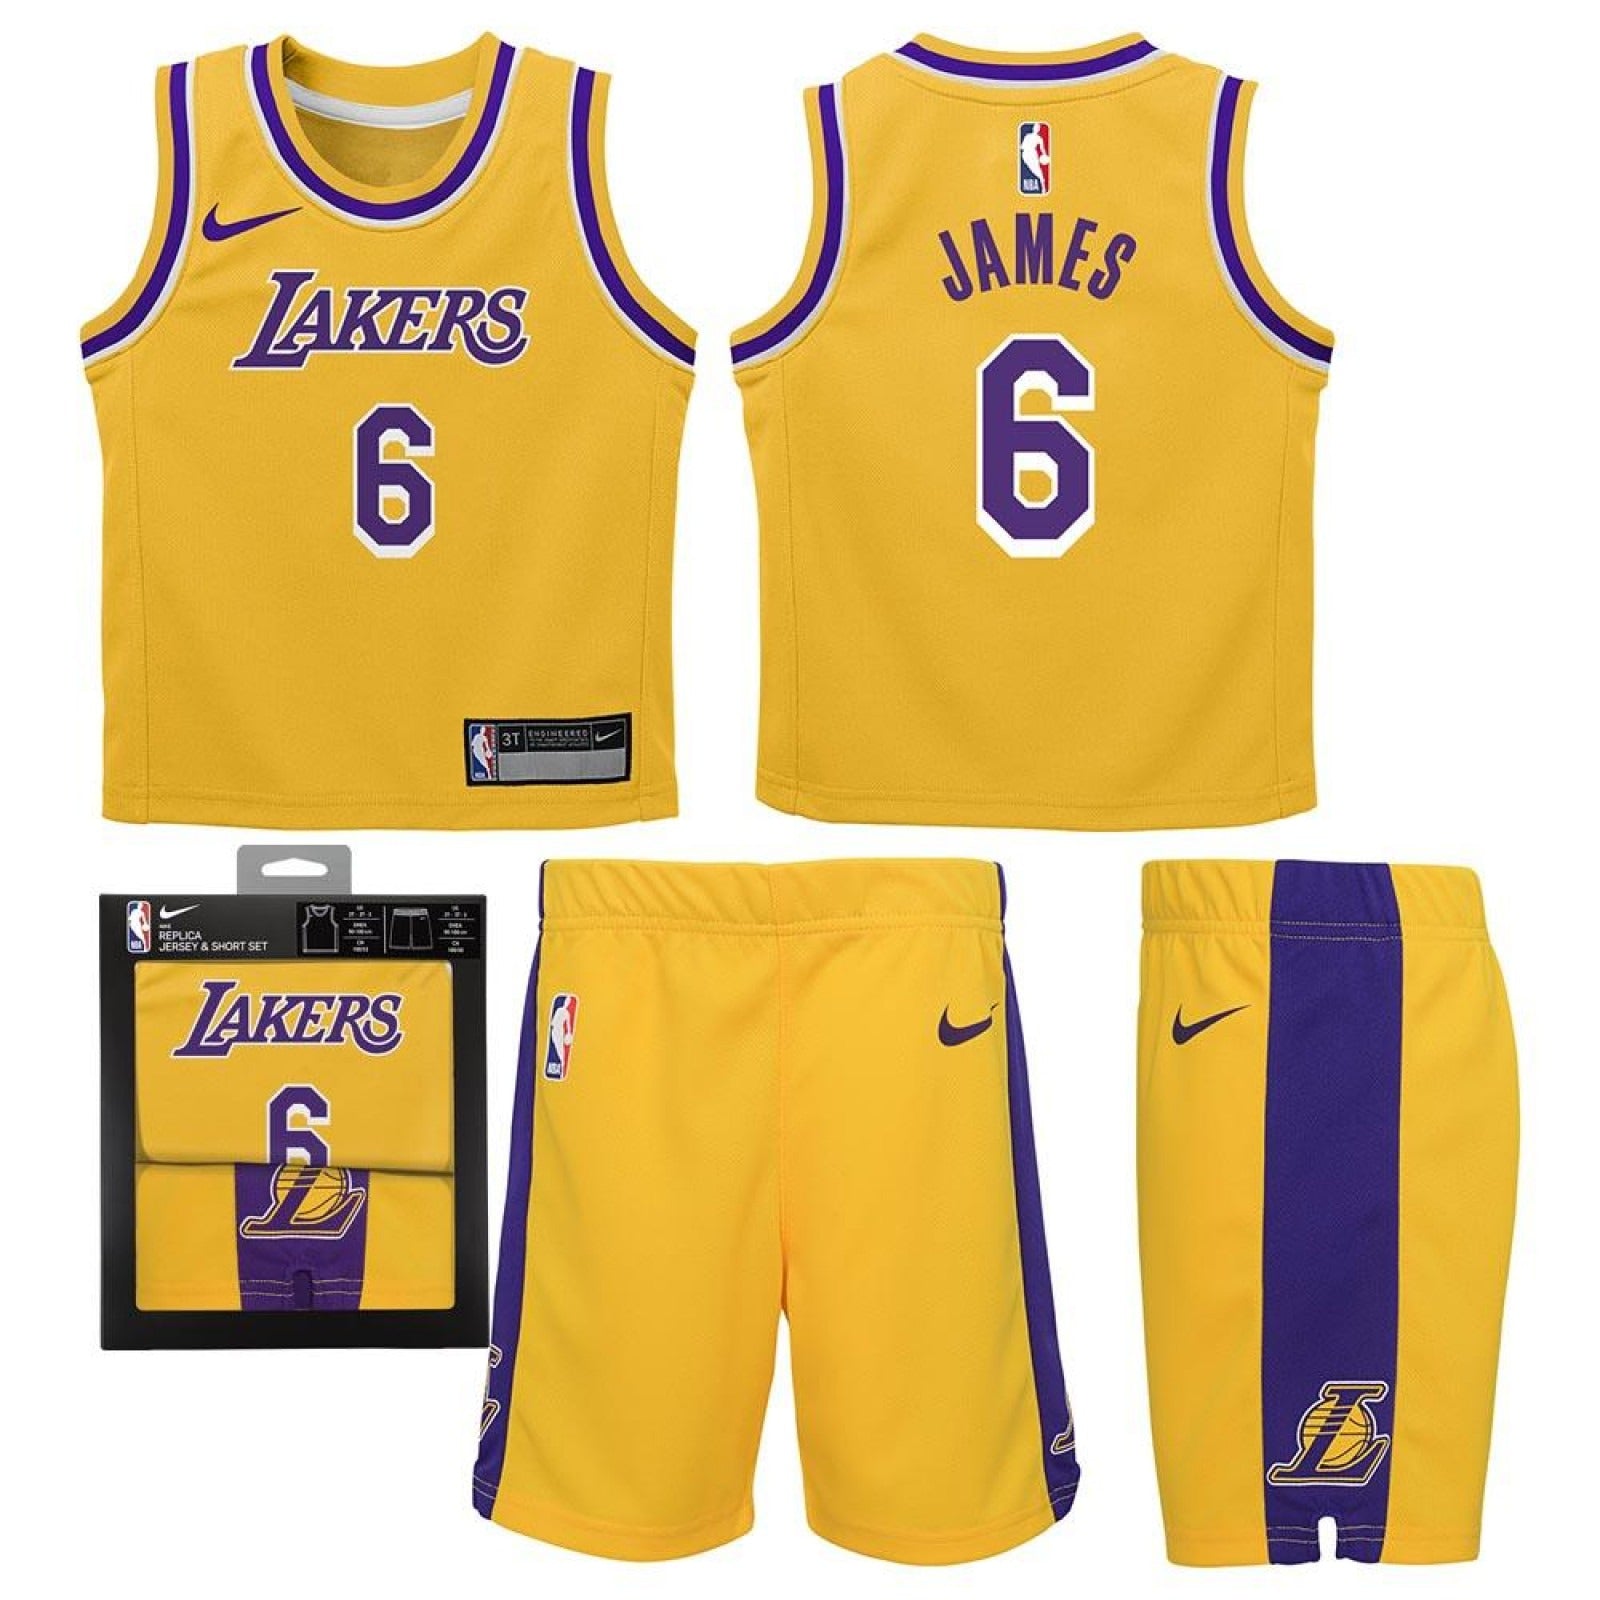 Nike Kids' Lebron James Los Angeles Lakers Icon Replica Jersey, Toddler  Boys (2t-4t) In Gold